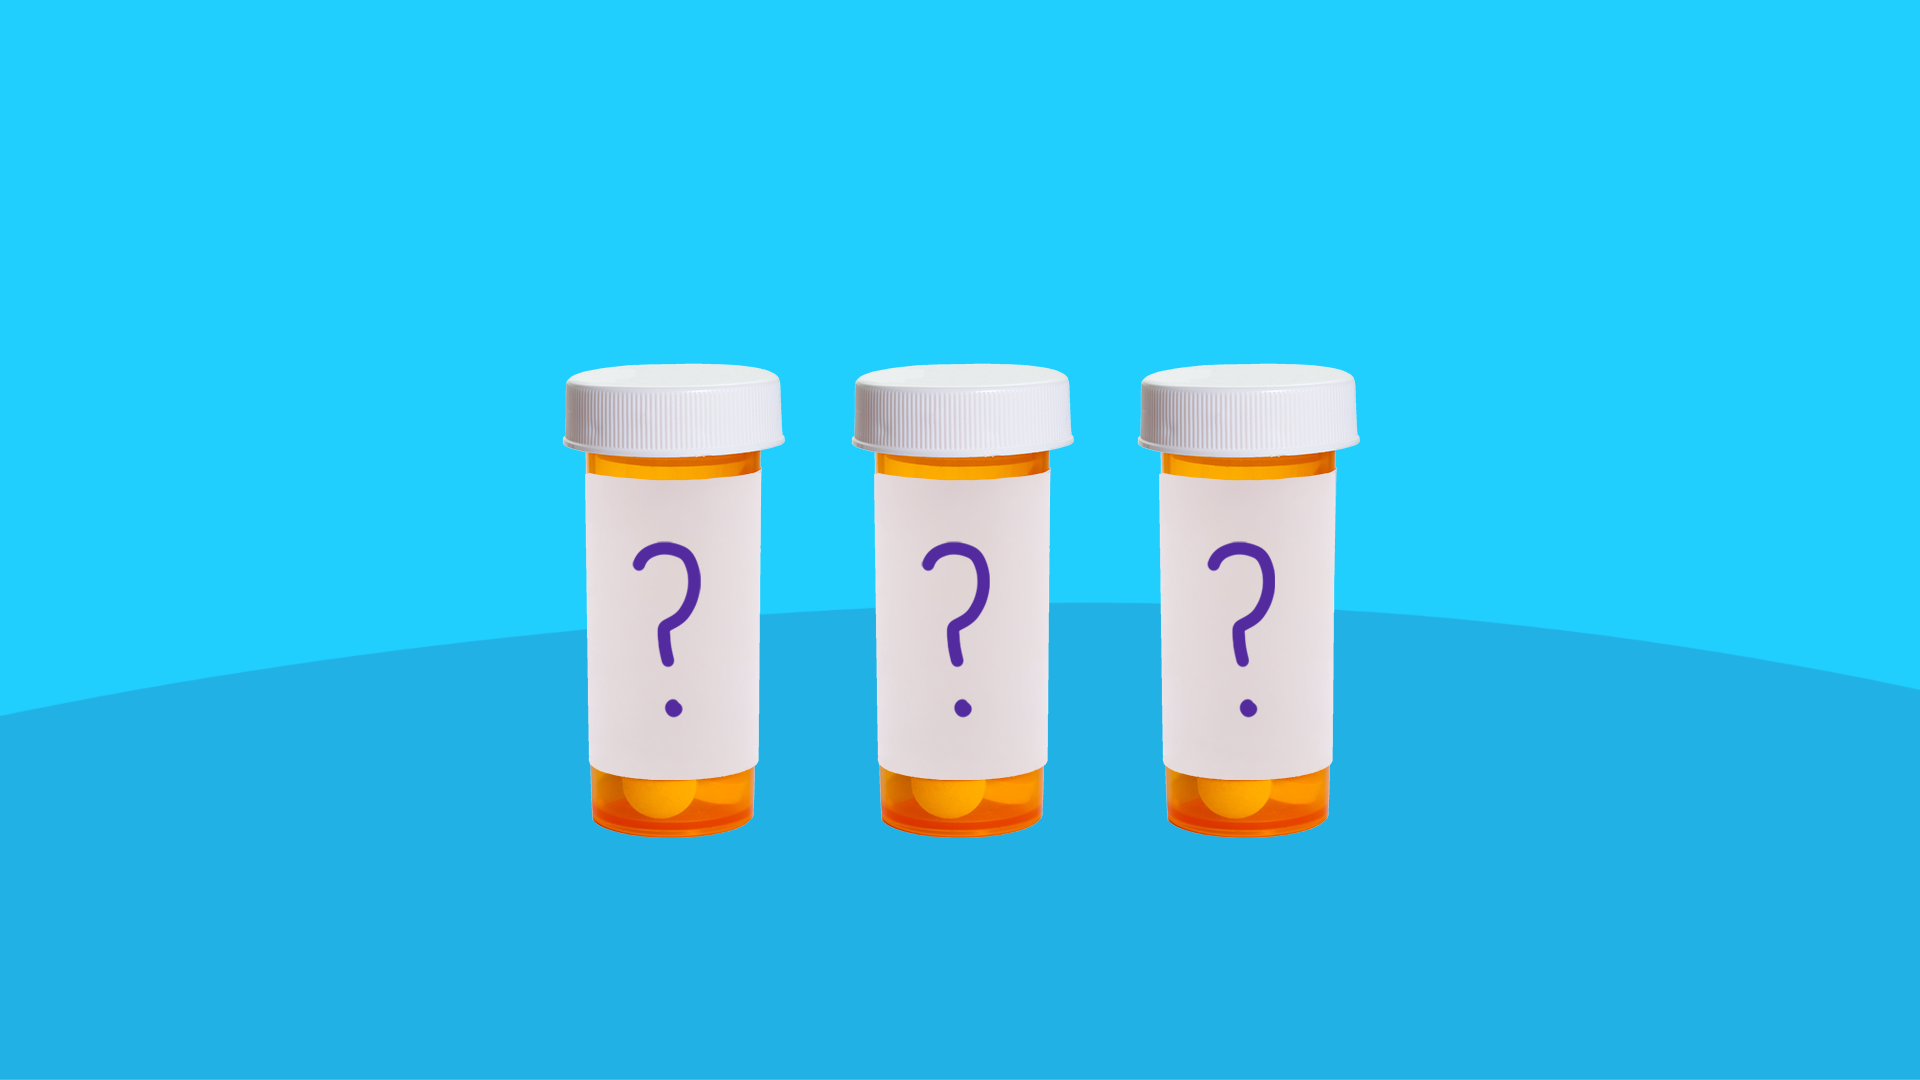 Three pill bottles with question marks: What can I take instead of losartan?